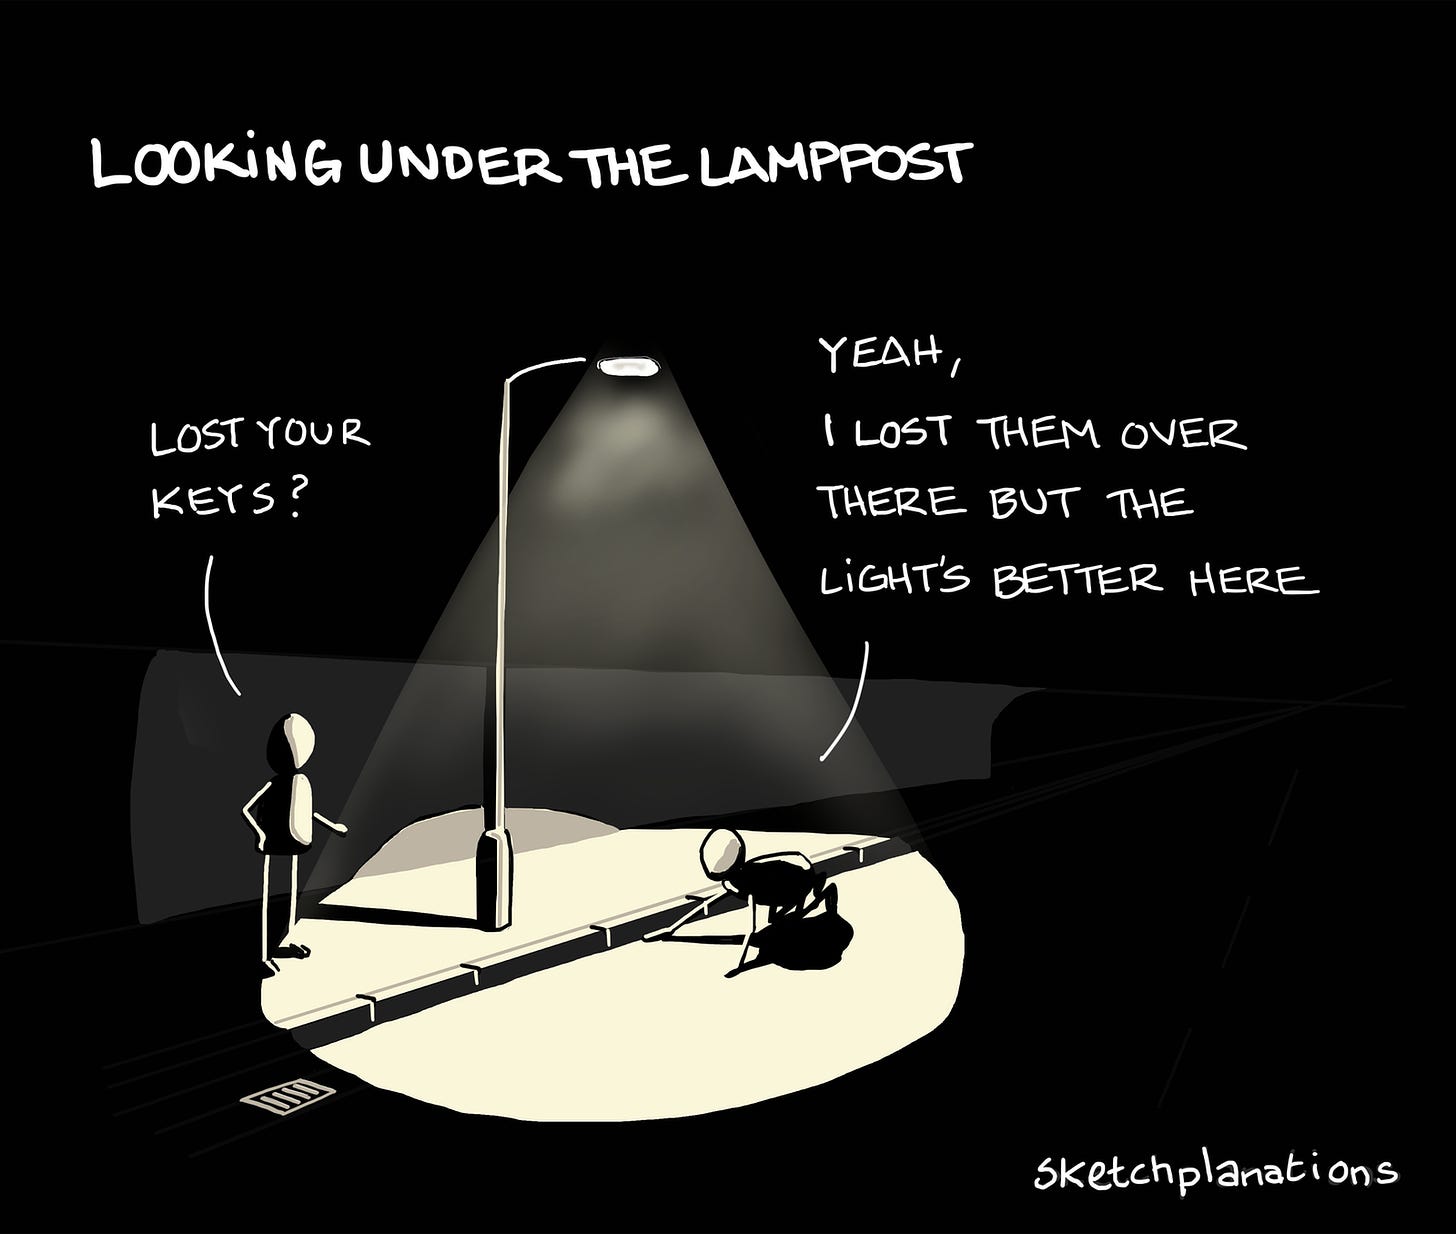 Looking under the lamppost - Sketchplanations